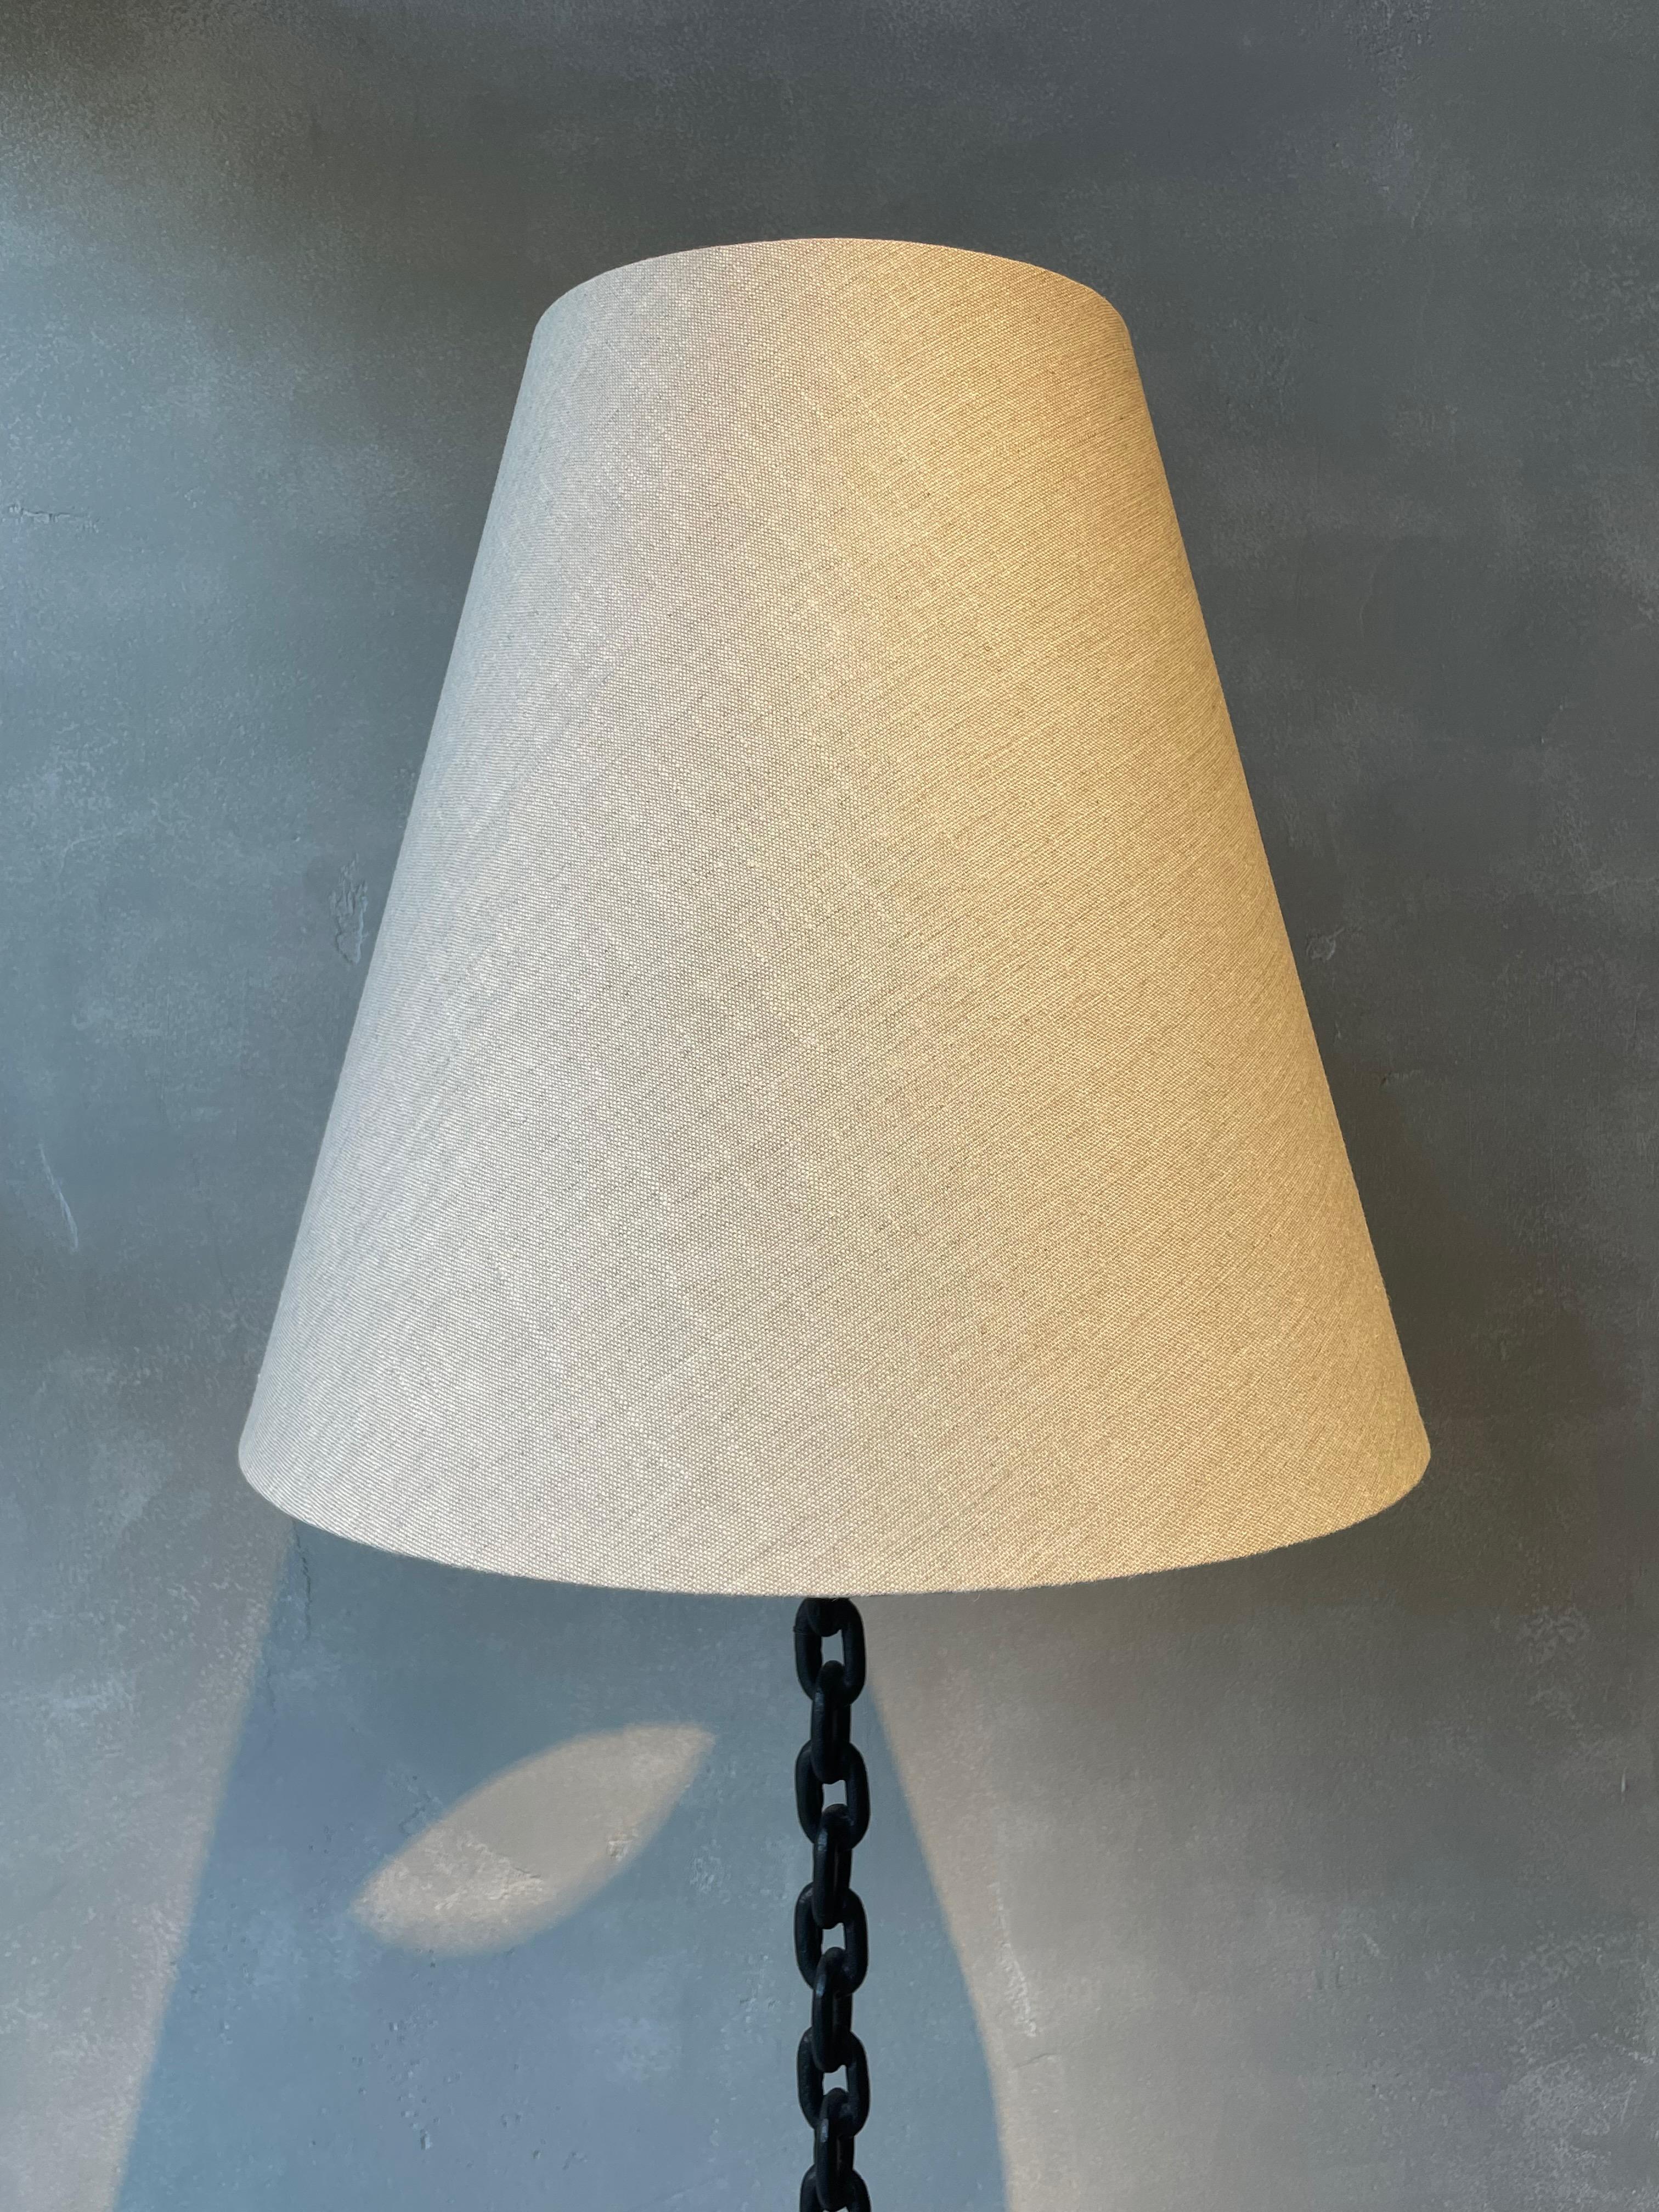 Chain Link With Drink Table Floor Lamp, France, 1940s For Sale 2